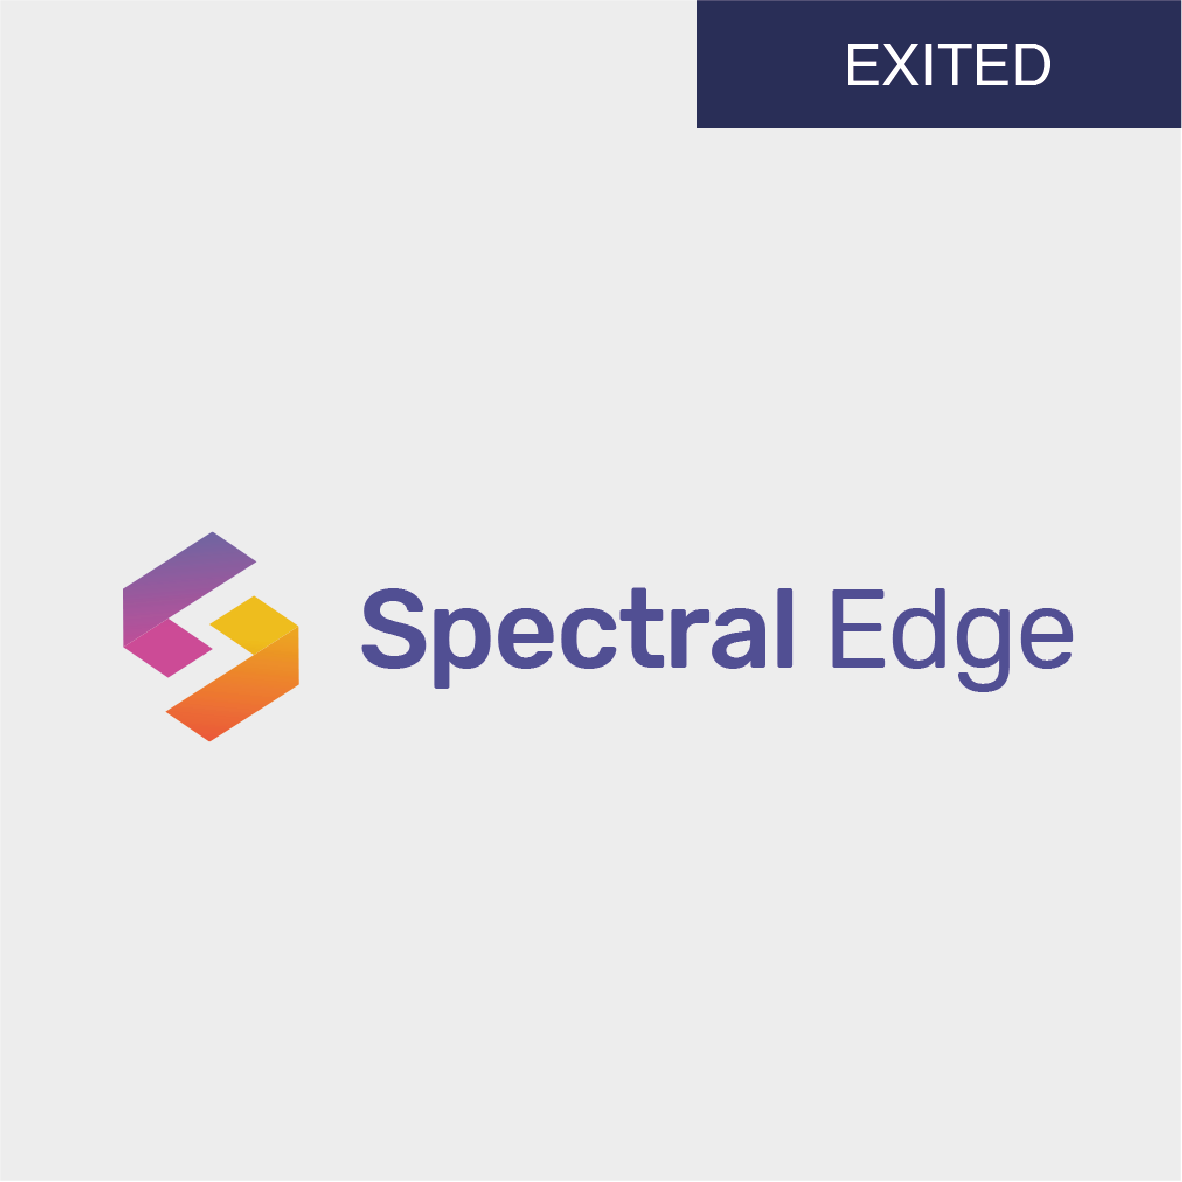 Spectral Edge Acquired